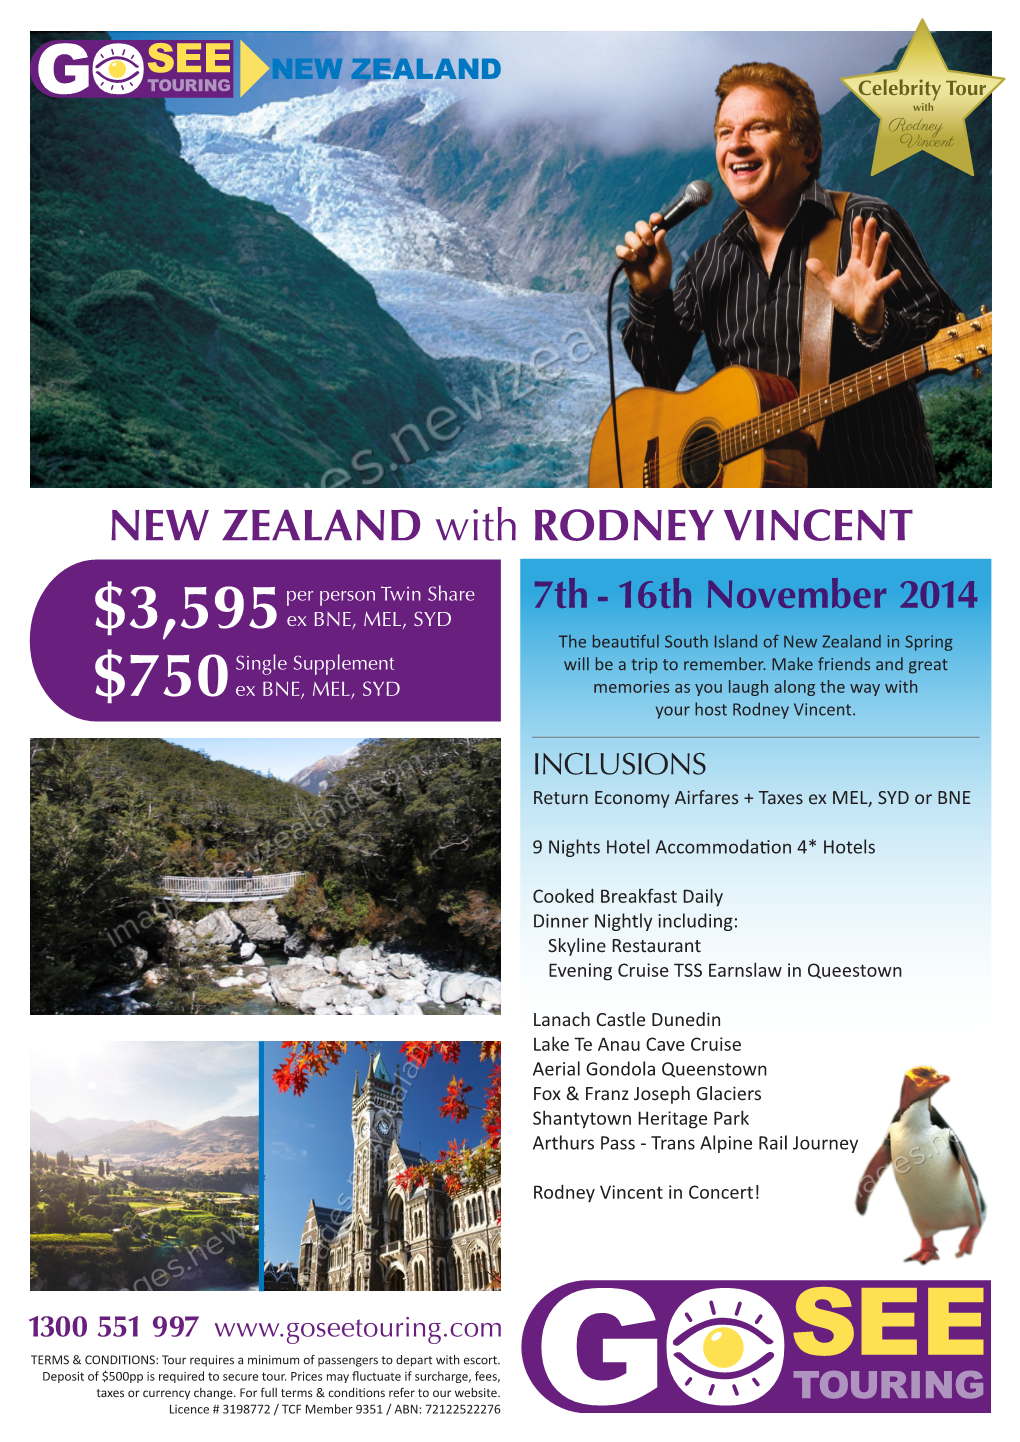 NEW ZEALAND with RODNEY VINCENT